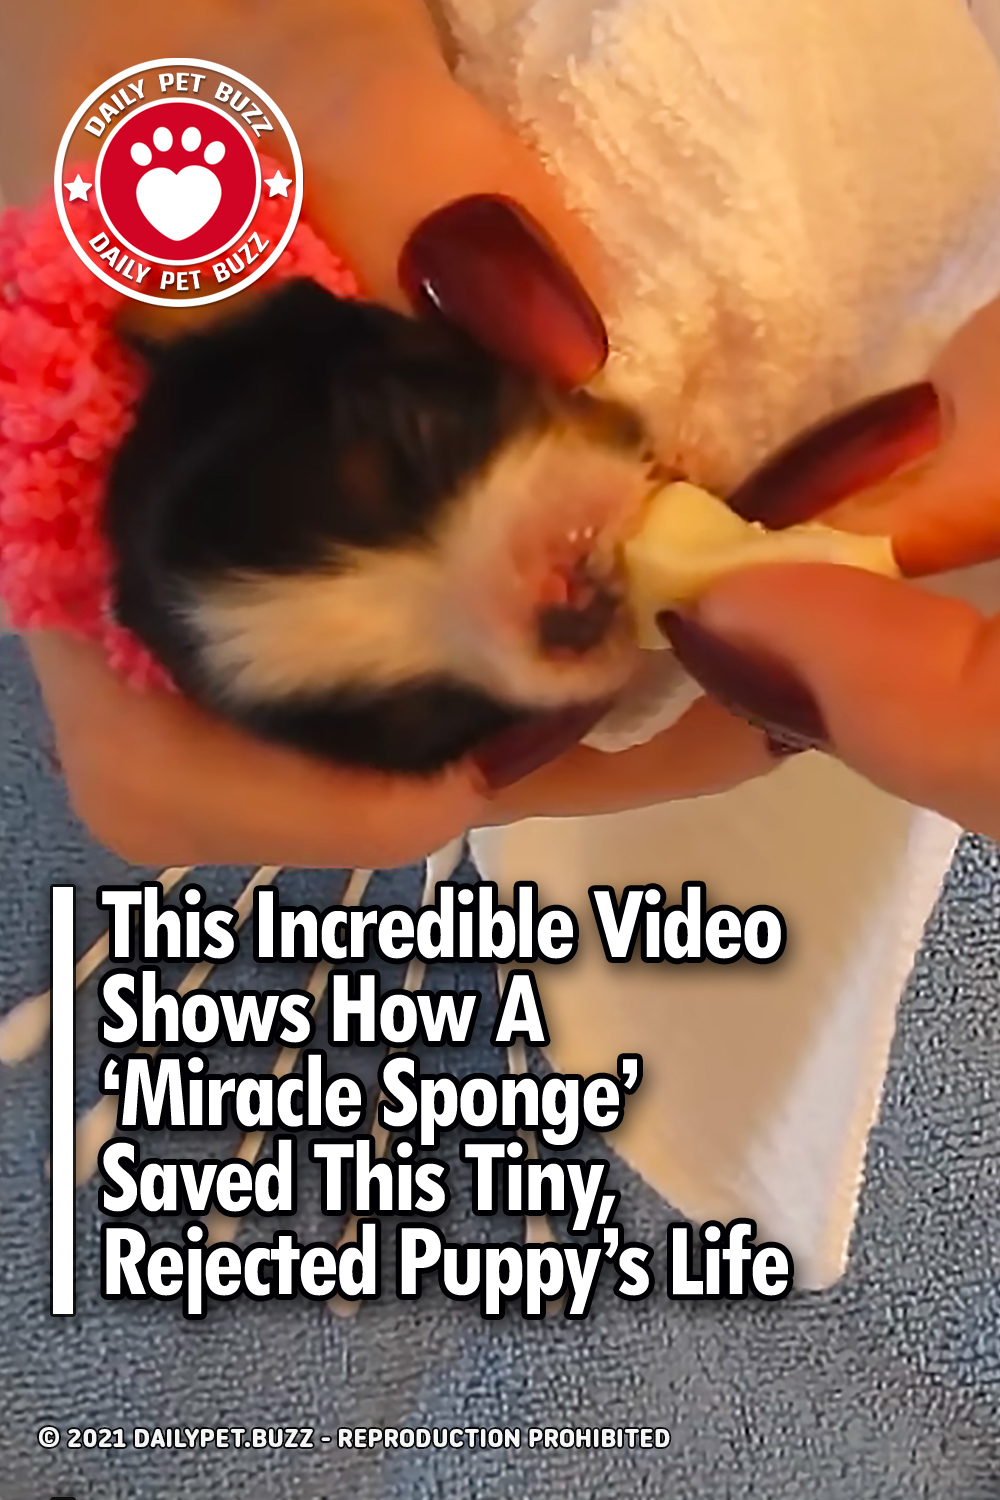 This Incredible Video Shows How A \'Miracle Sponge\' Saved This Tiny, Rejected Puppy\'s Life